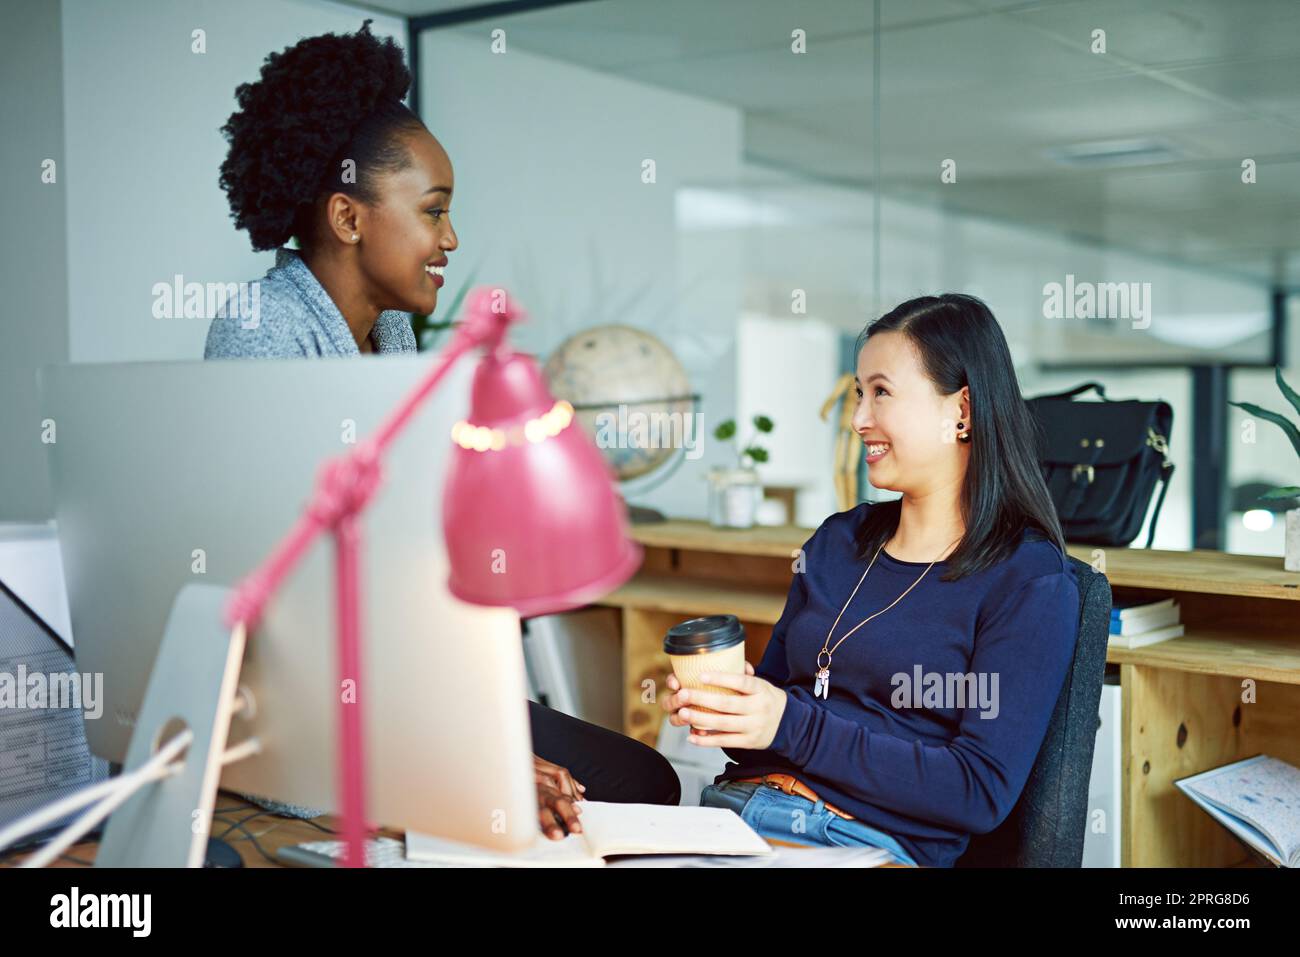 Talking strategy. two young businesswomen talking in the office. Stock Photo